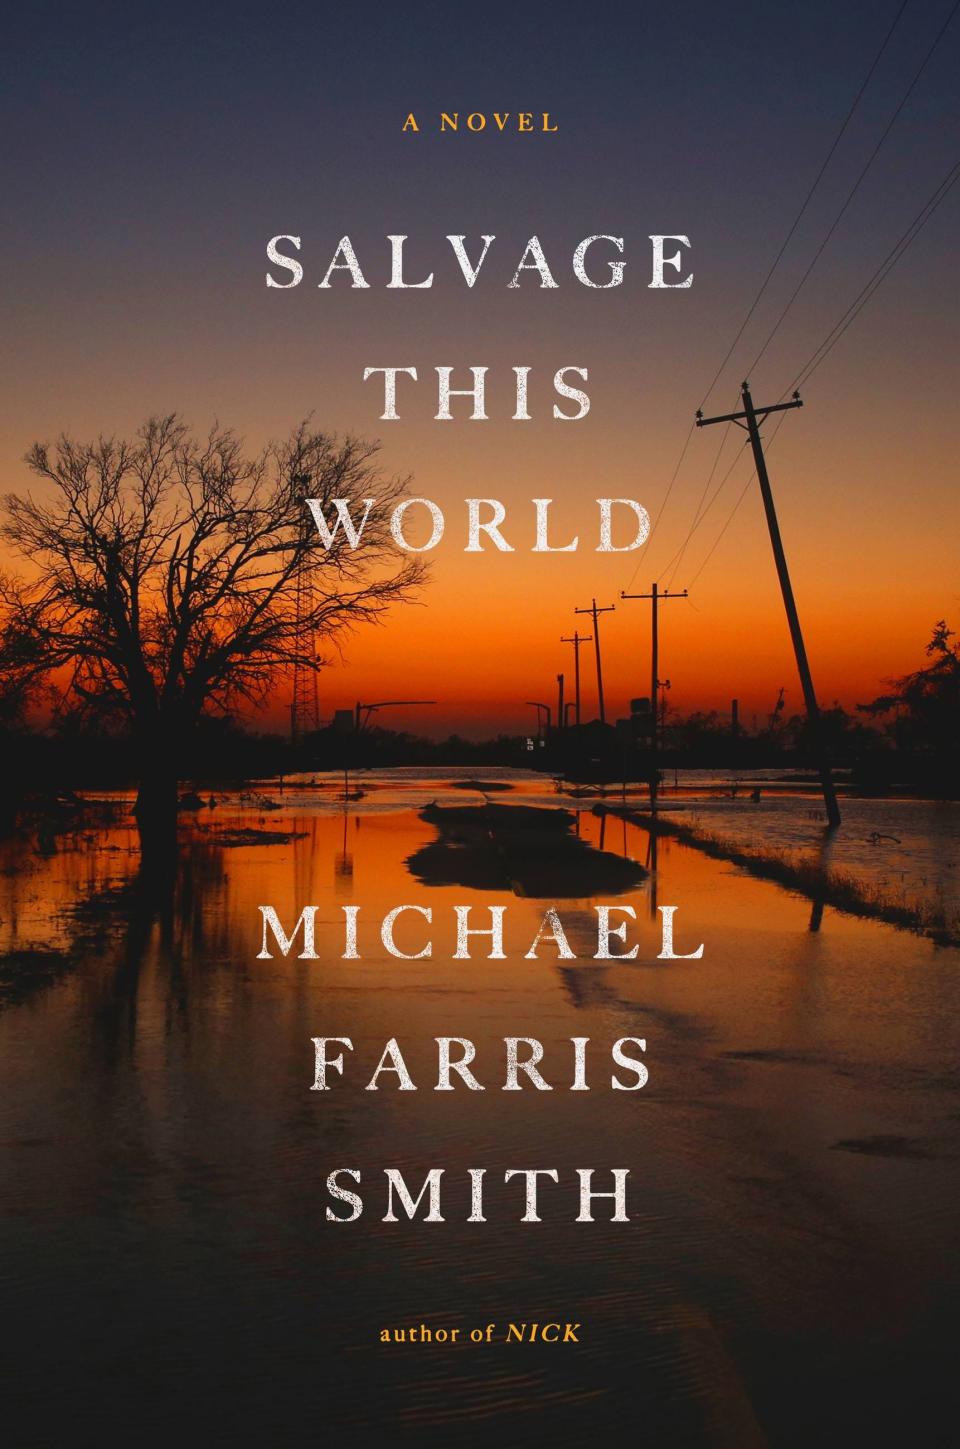 "Salvage This World" by Michael Farris Smith